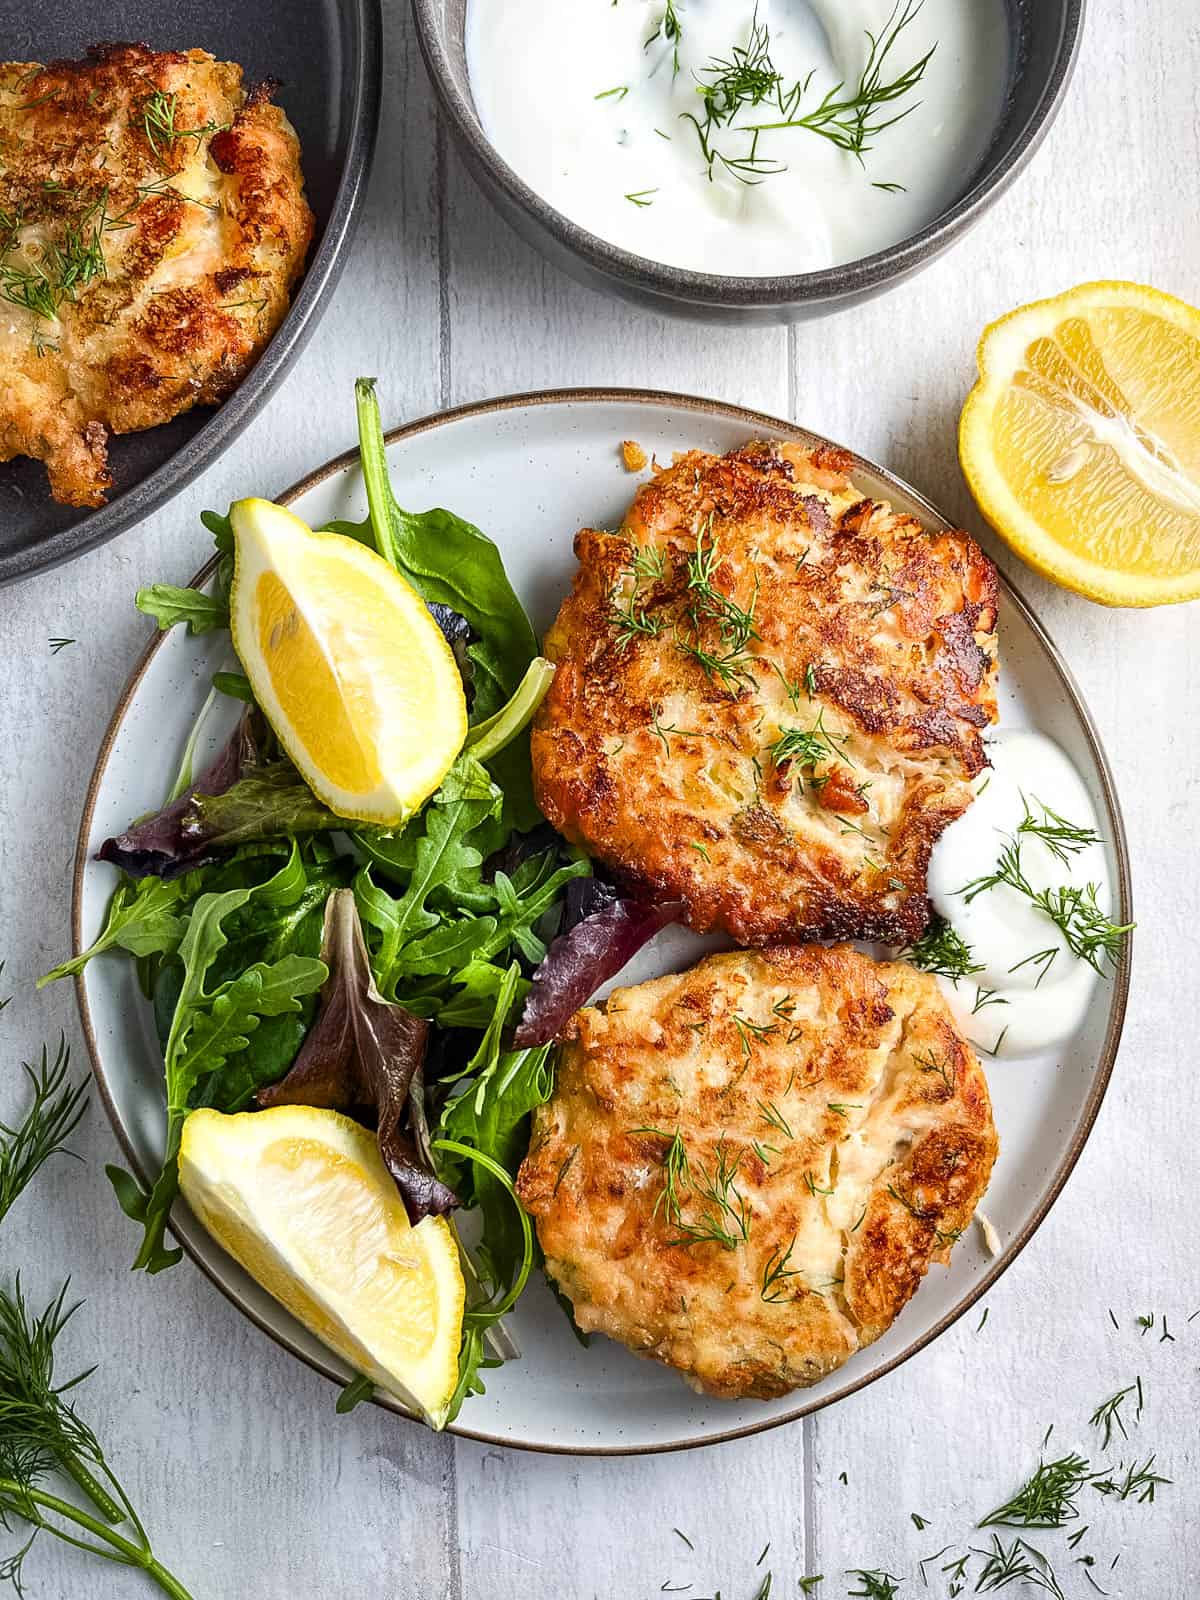 two salmon fishcakes on a plate with a green salad and lemon wedges.